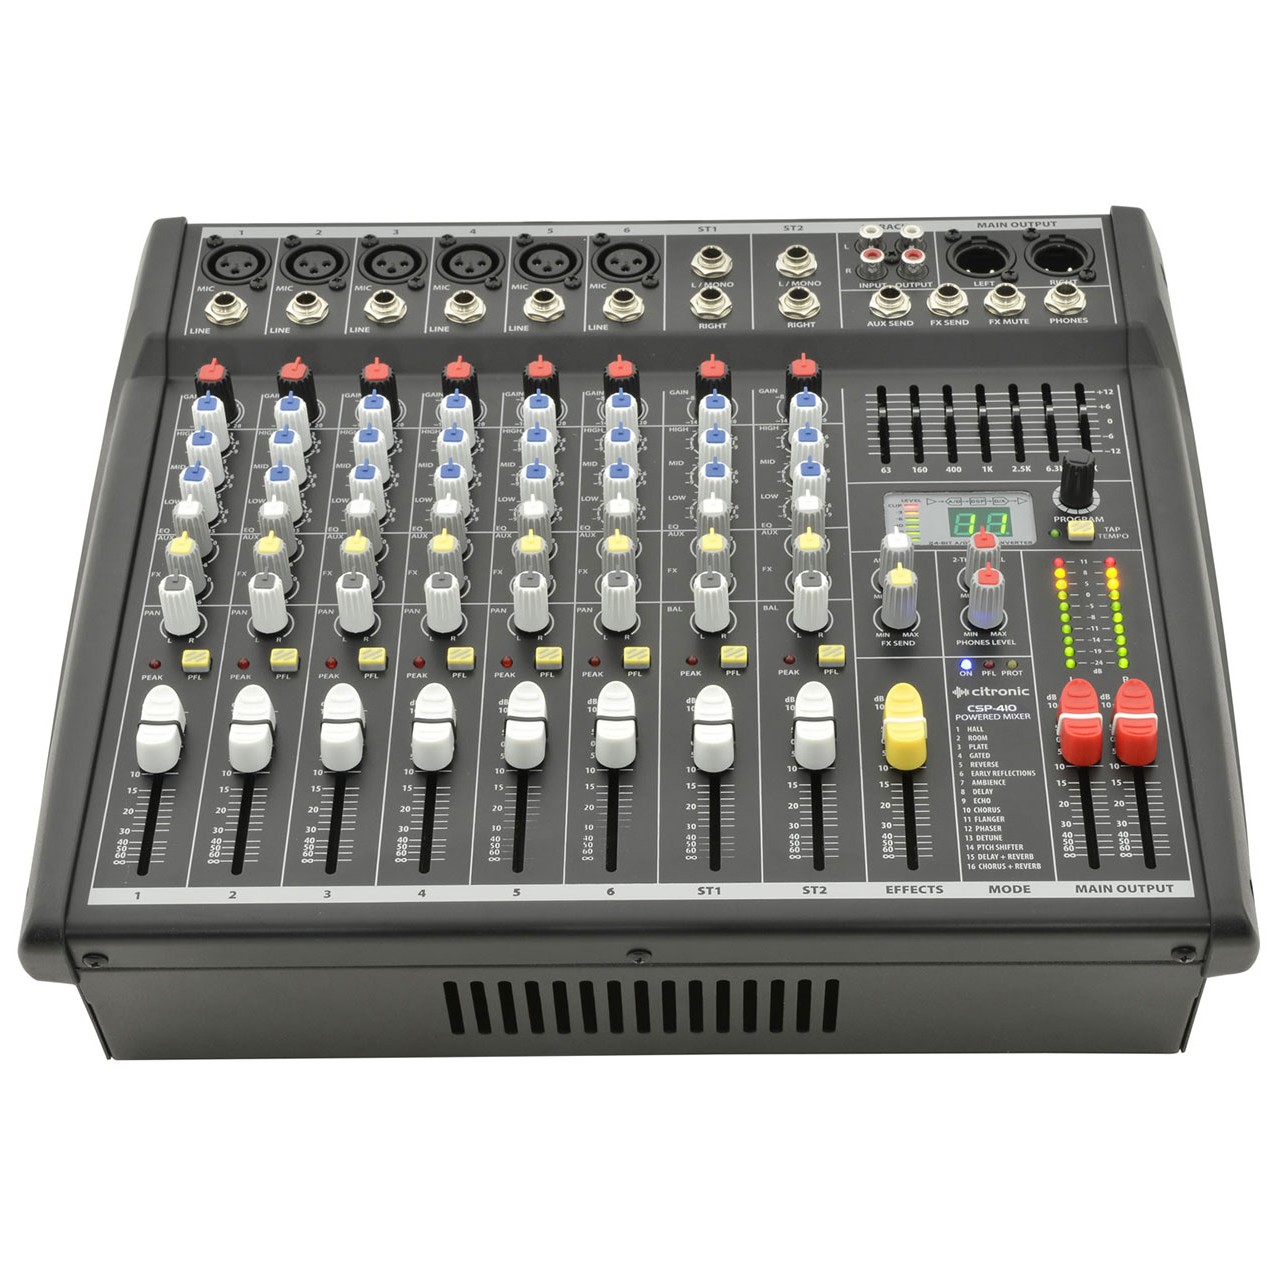 Citronic POWERED MIXER 400W FRE FOR CITRONIC FREQUENCY RESPONSE MAX 30KHZ PLUG TYPE UK 